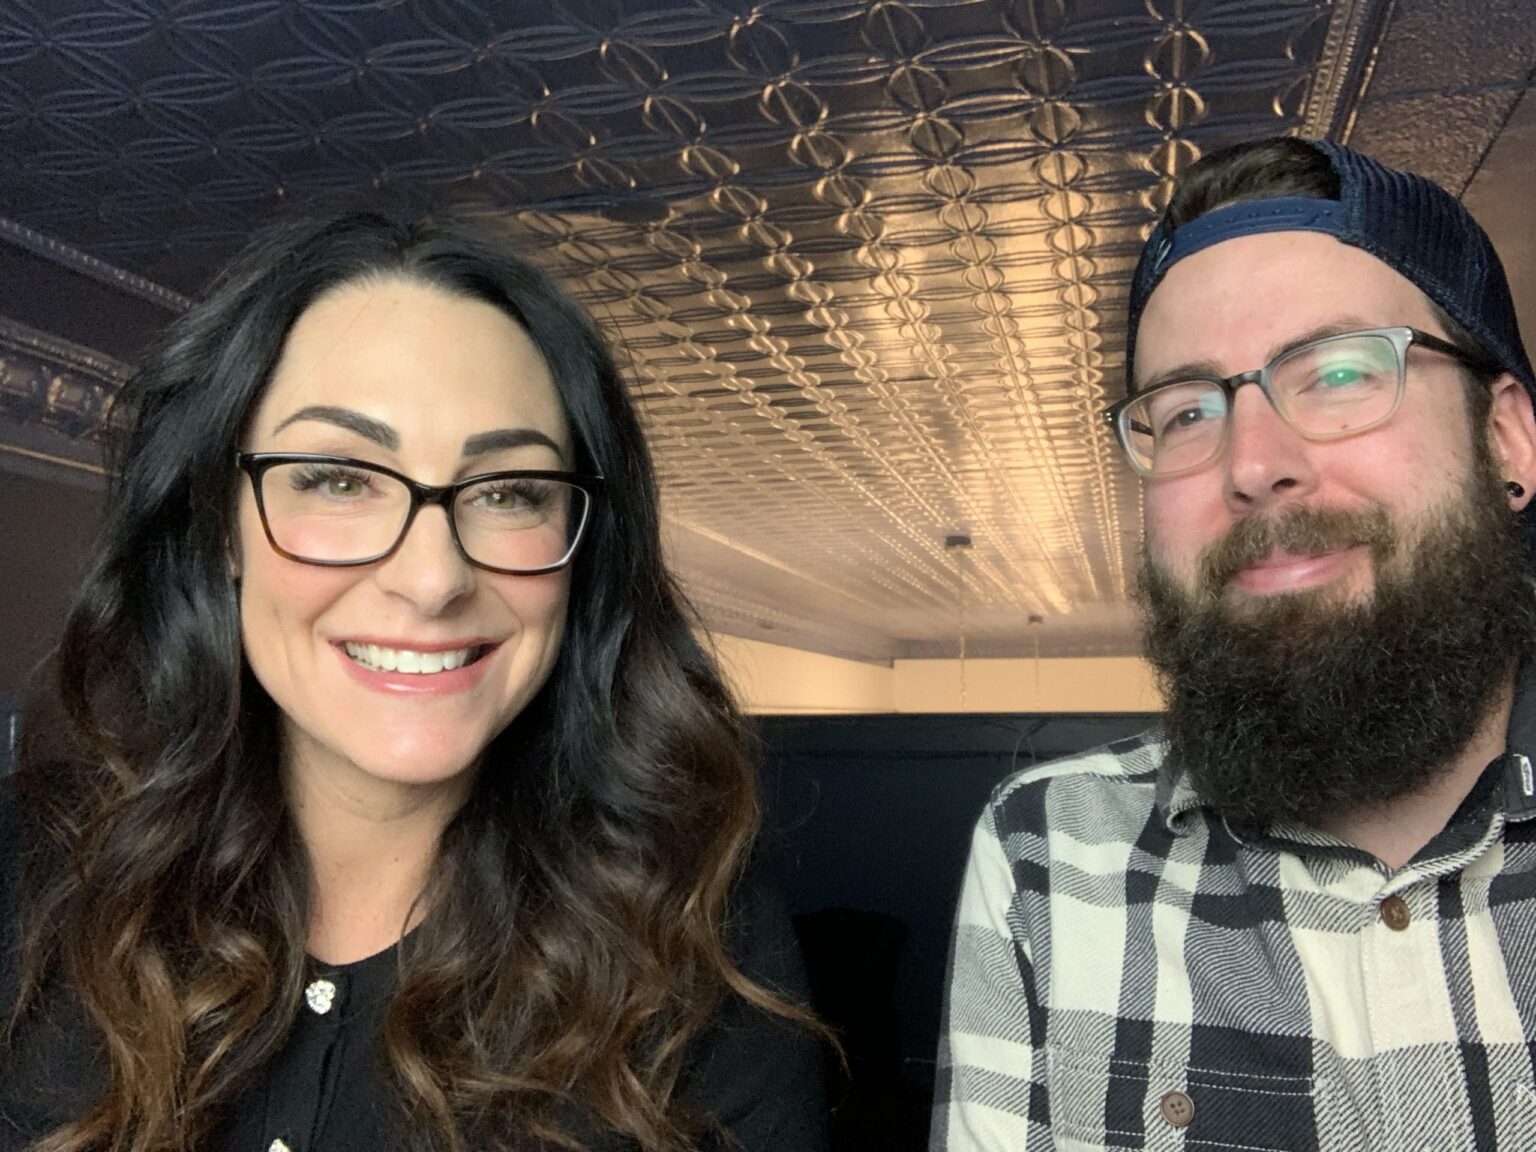 better-business-podcast-host-kelli-rae-and-lane-taking-selfie-before-new-episode-scaled-1